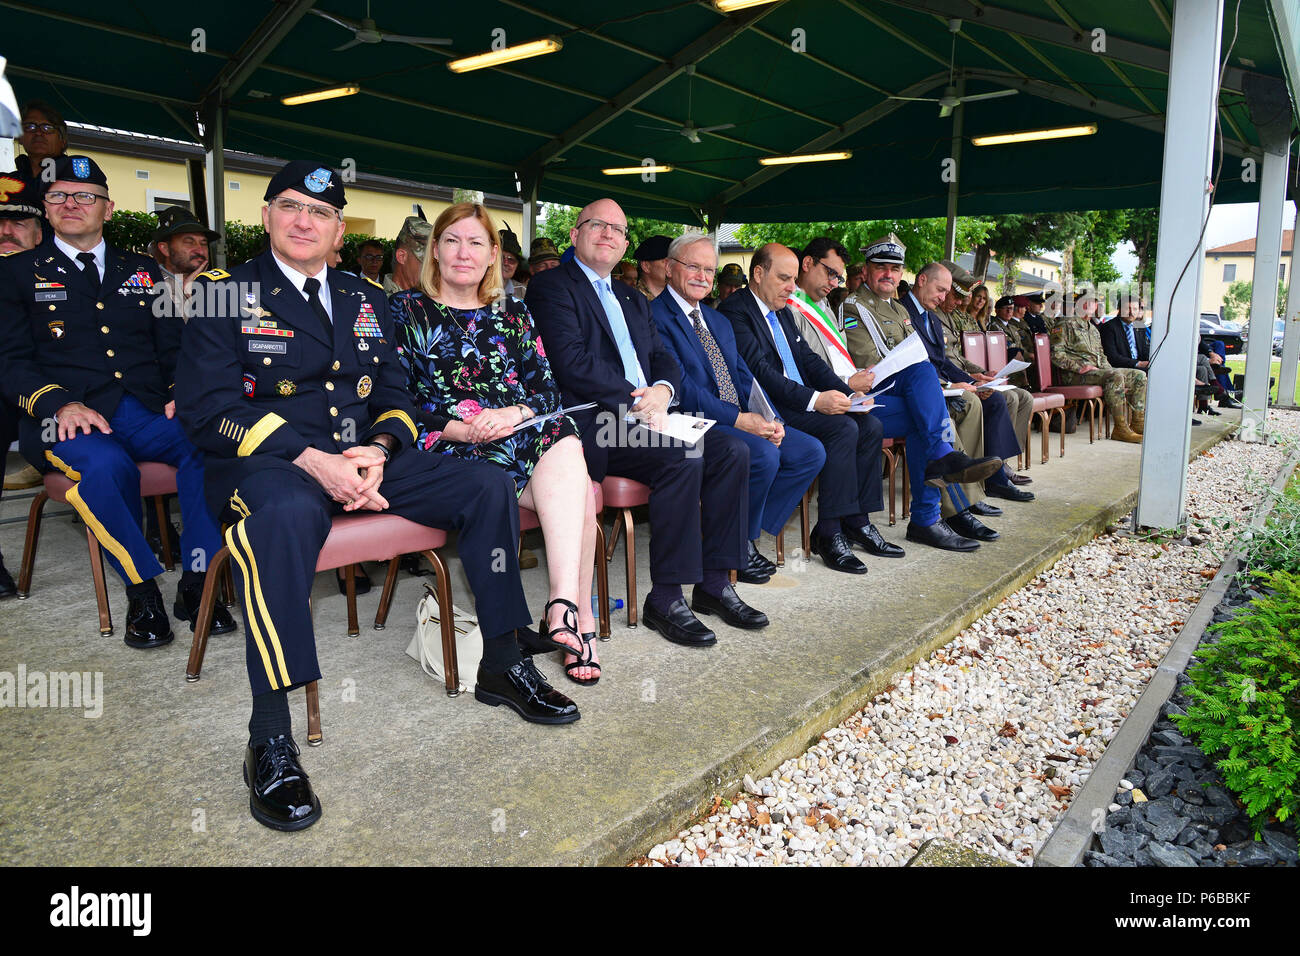 From left, General Curtis M. Scaparrotti, Supreme Allied Commander Europe (SACEUR) commander, his wife, Ambassador Philip T. Reeker, United States Consul General in Milan and distinguished guest during a  retirement ceremony at Caserma C. Ederle Vicenza, Italy, June 22, 2018. (U.S. Army photo by Paolo Bovo). Stock Photo